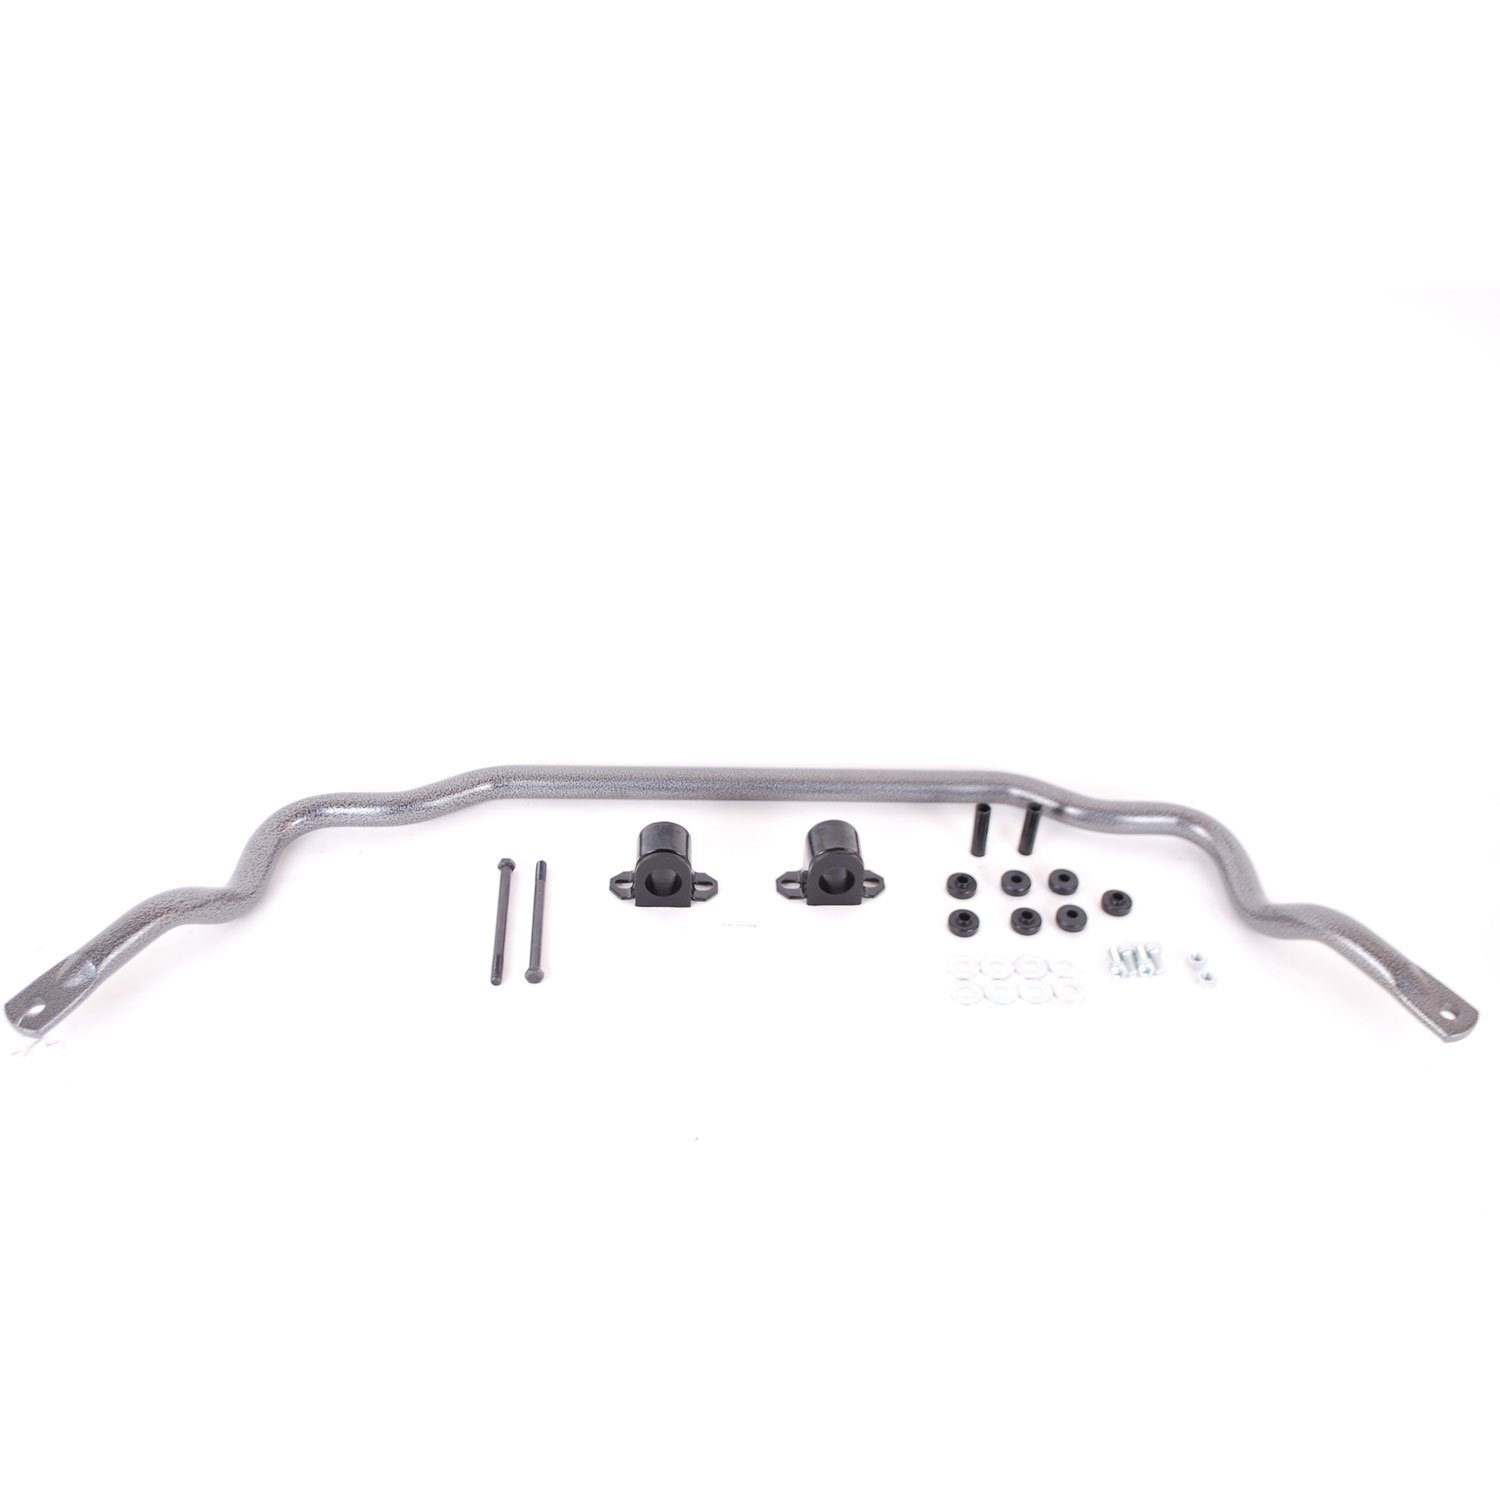 Front Sway Bar for 1977-1996 GM B-Body, Impala, Caprice/Caprice Classic